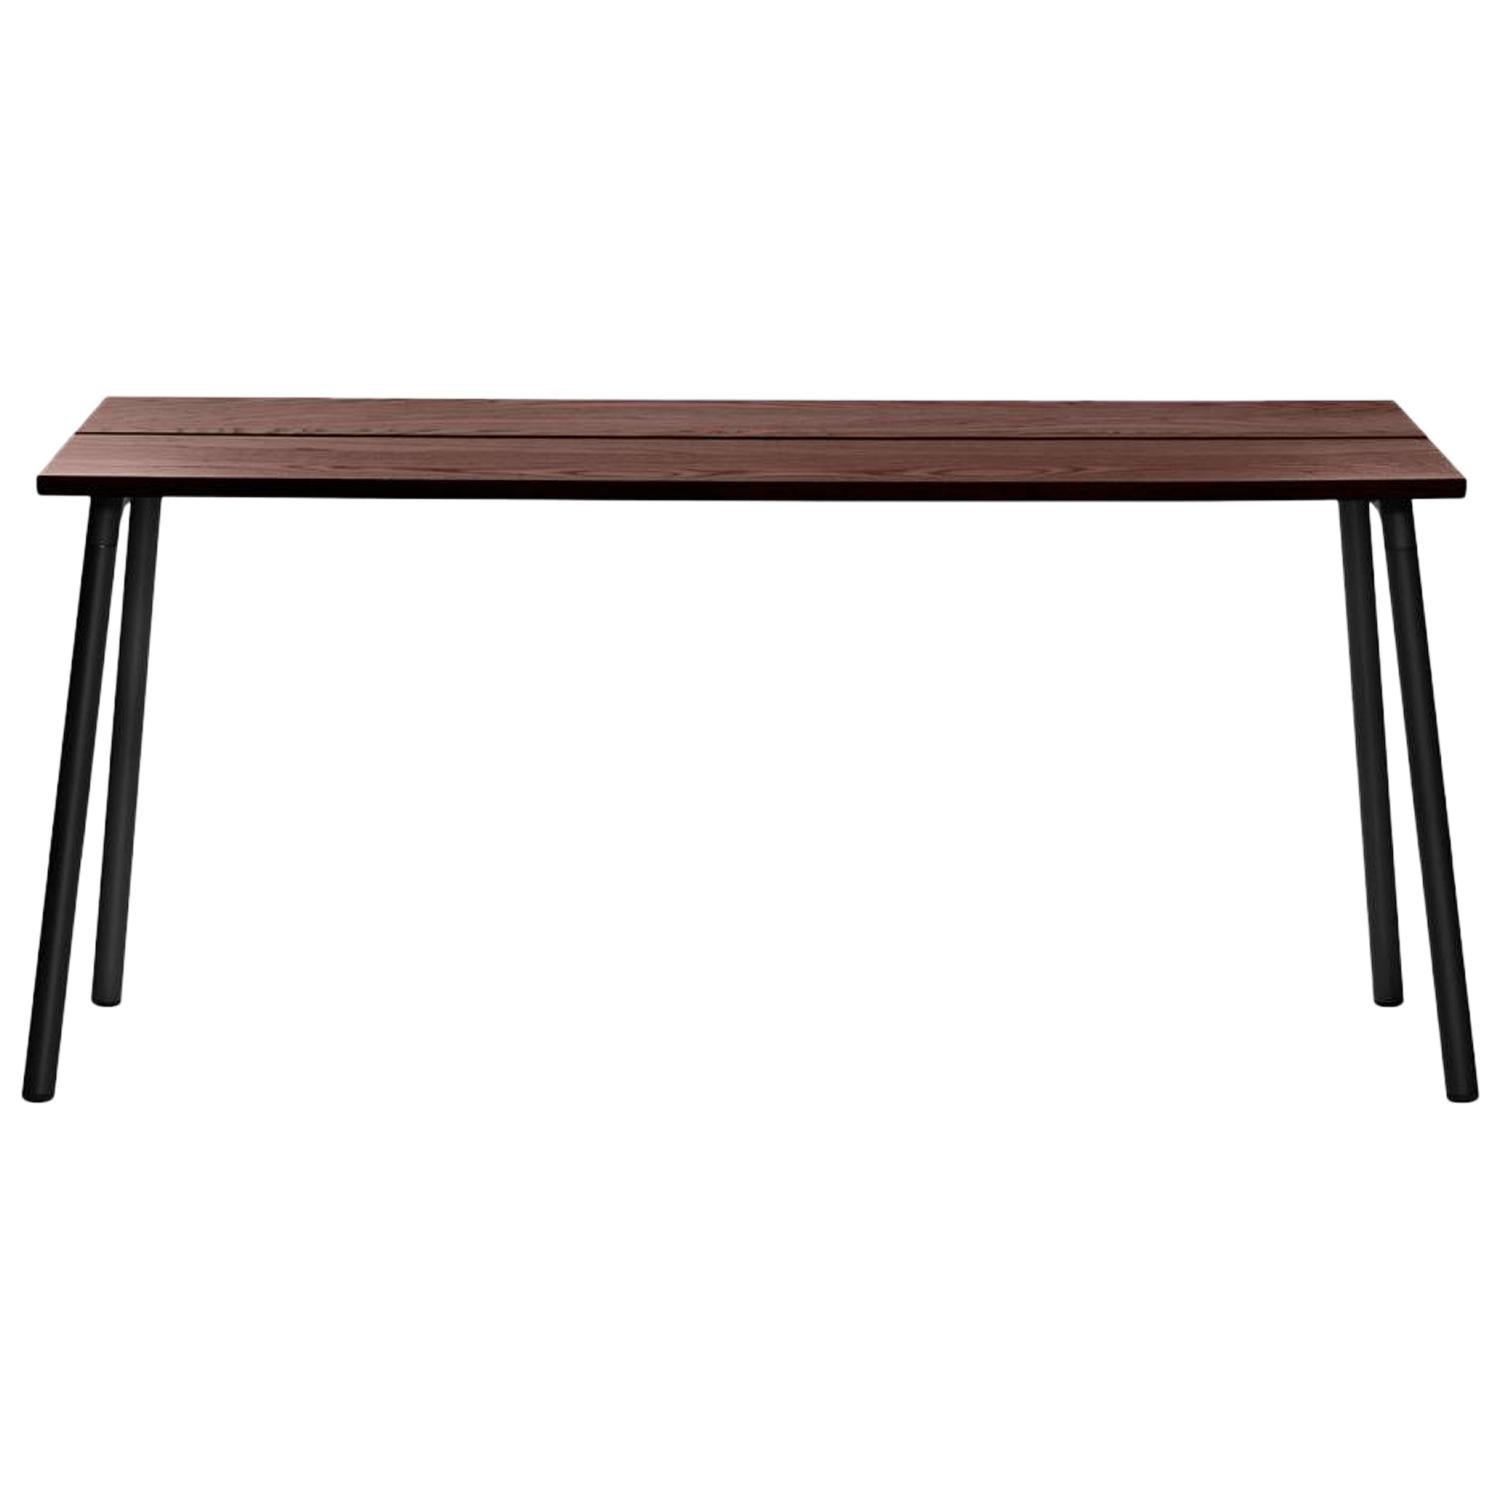 Emeco Run Small Side Table in Dark Powder-Coat & Walnut by Sam Hecht & Kim Colin For Sale